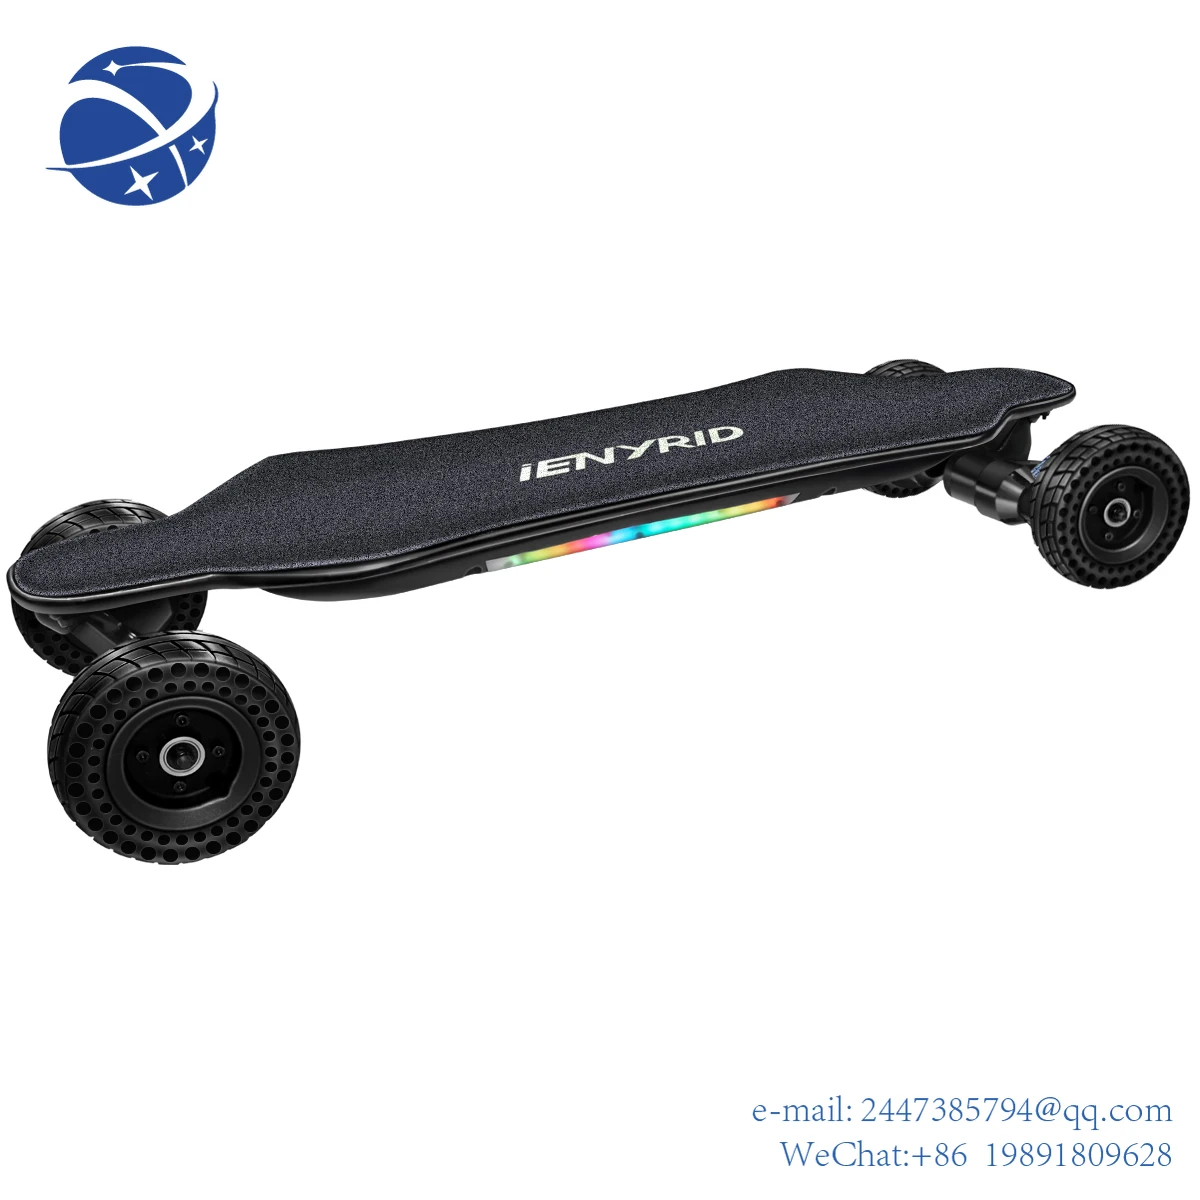 Yun YiUSA warehouse 4 wheel Electric SUV-skateboard Fast delivery time FCC ROHS CE electric skateboard is best